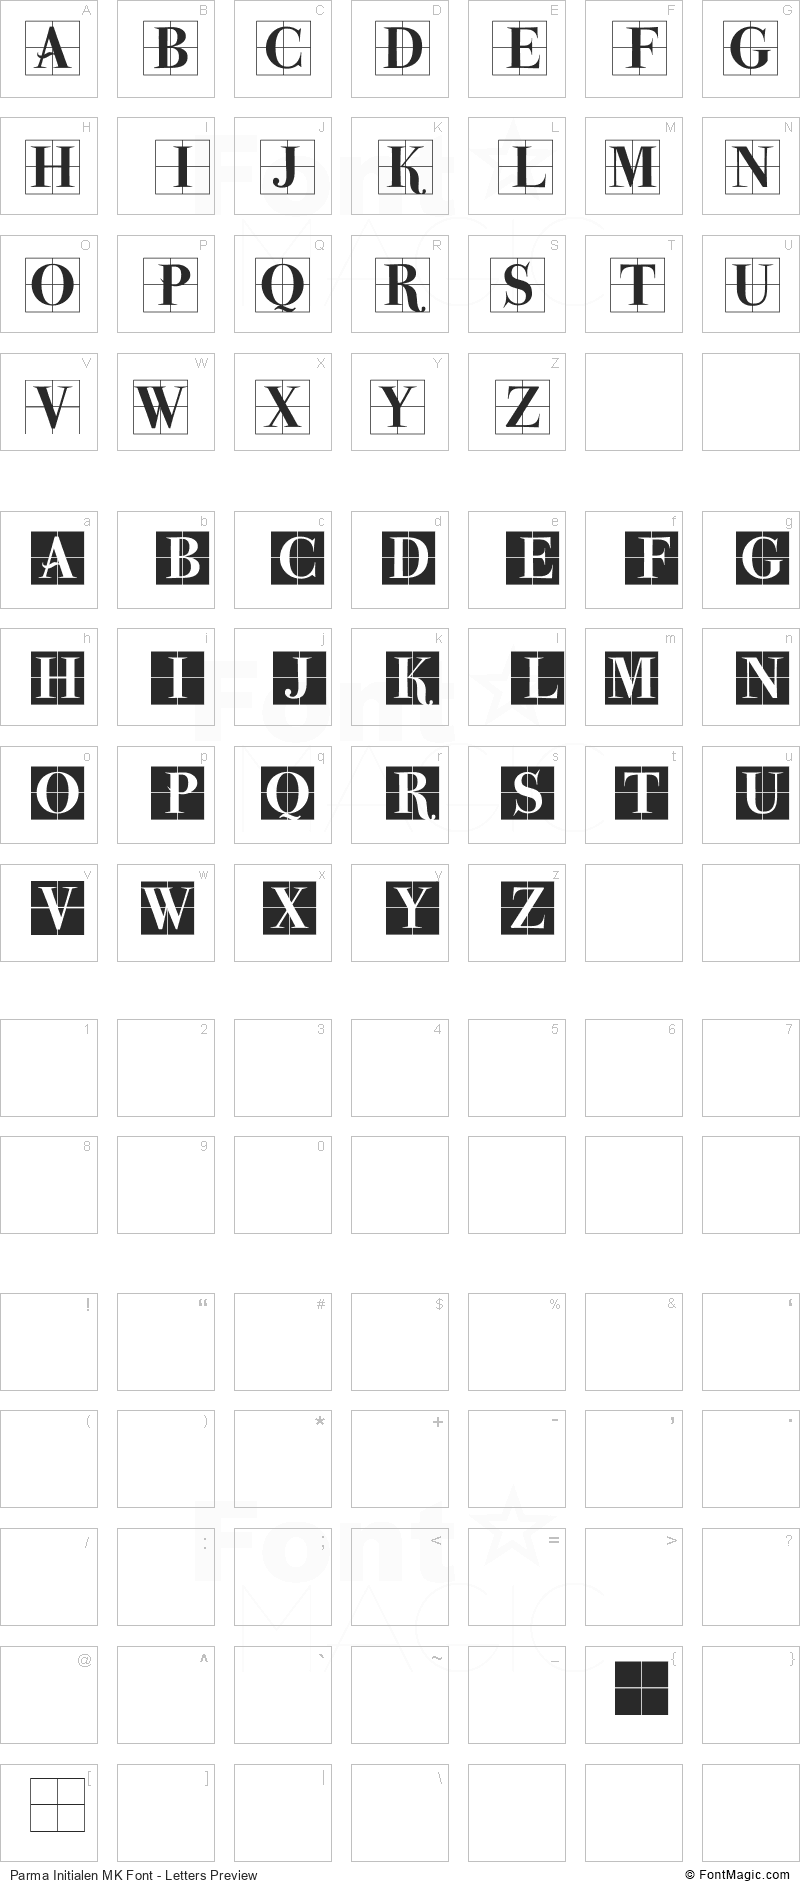 Parma Initialen MK Font - All Latters Preview Chart